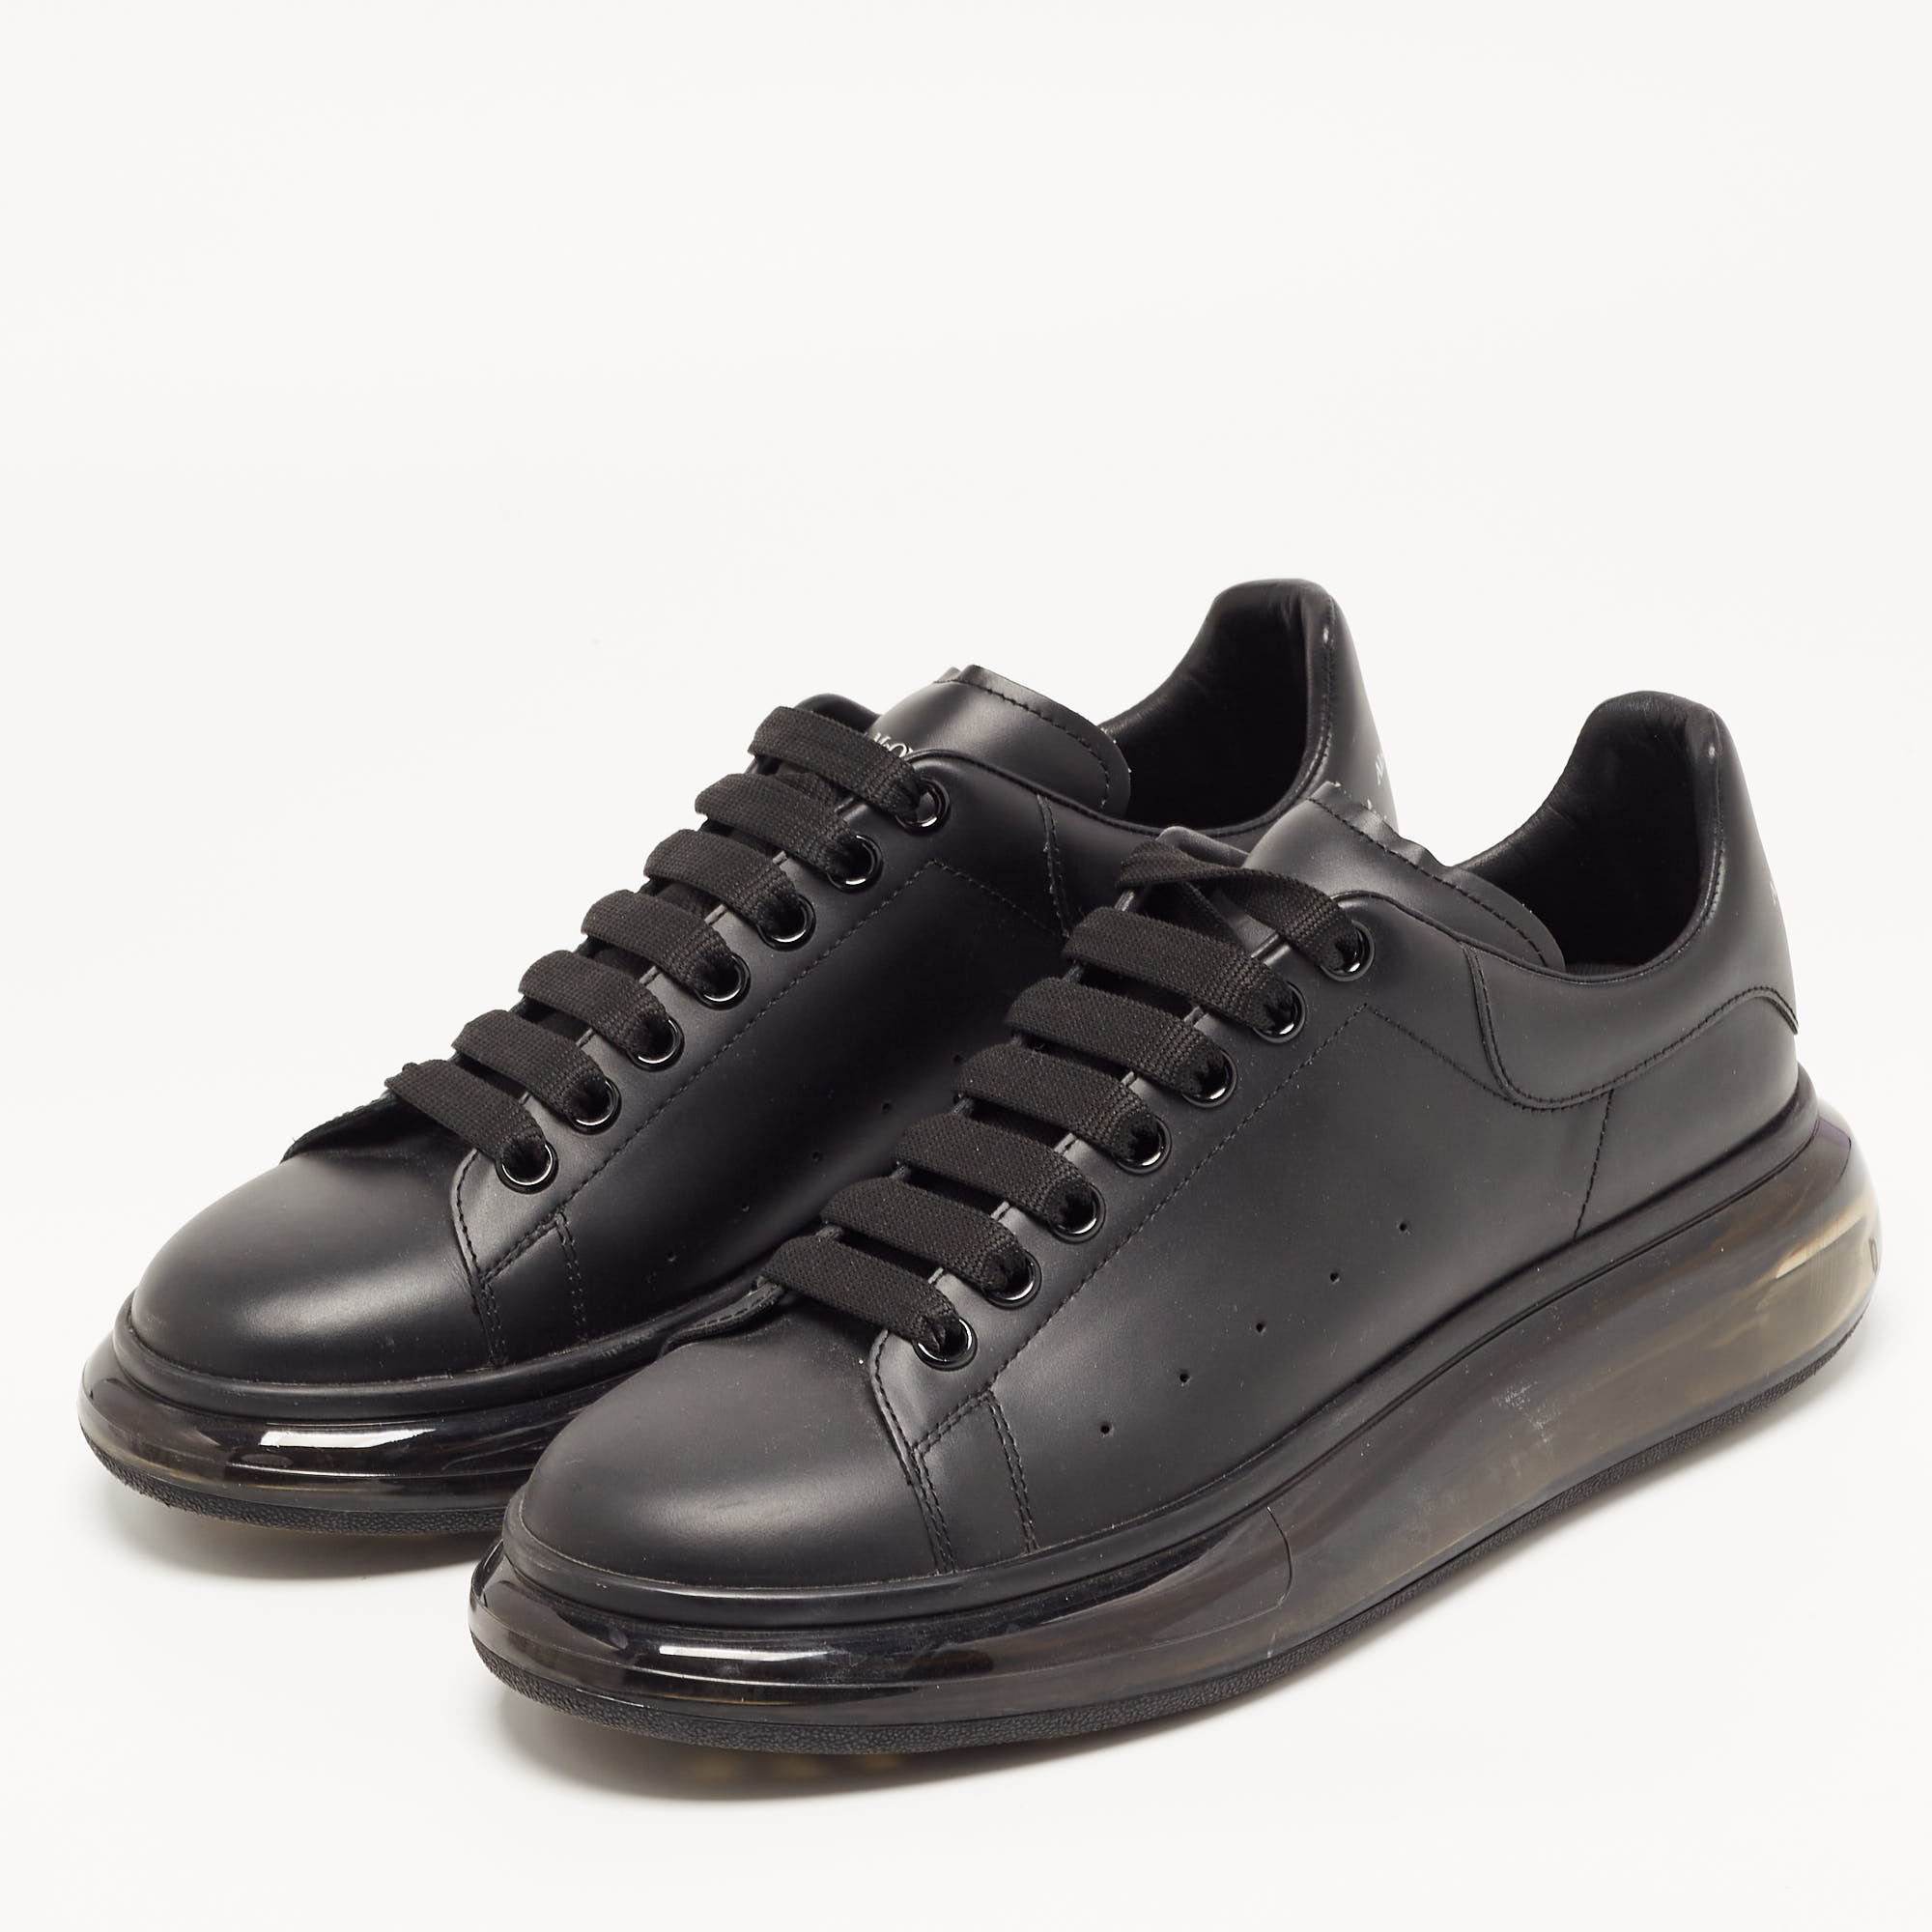 

Alexander McQueen Black Leather Oversized Transparent Sole Sneakers Size